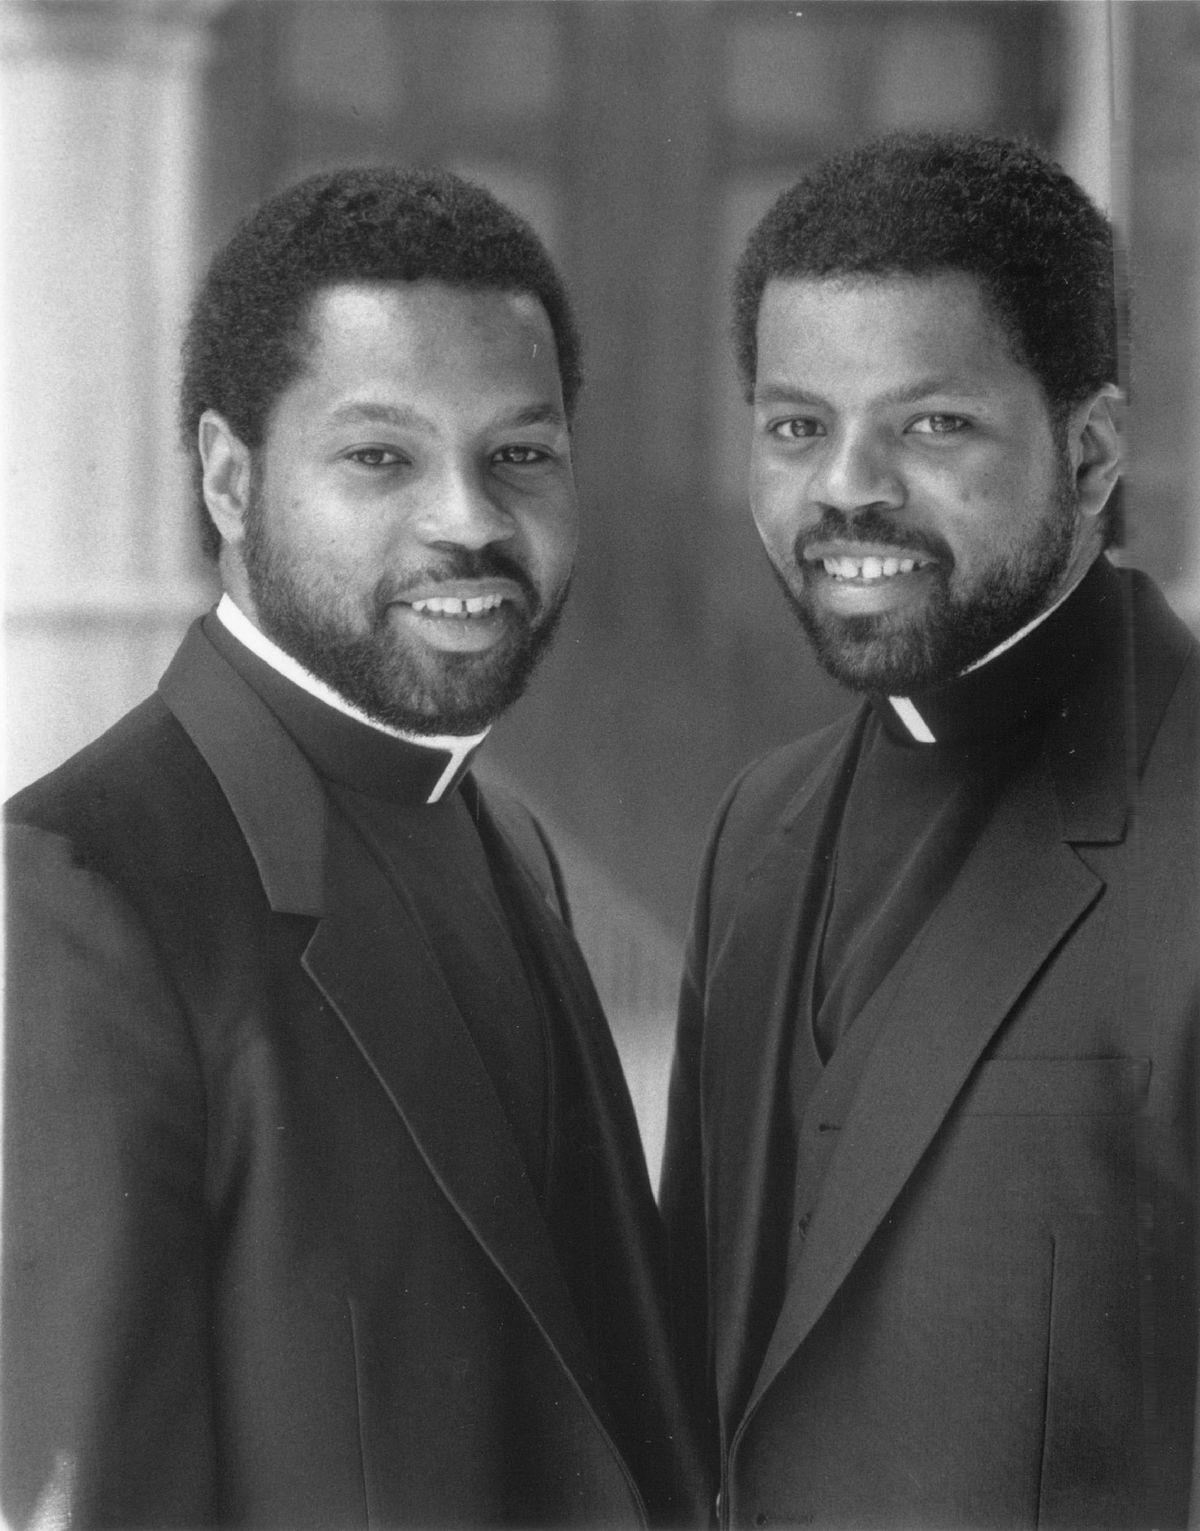 Charles and Chester Smith made history in 1988 when they became the first black twins ordained by the Roman Catholic church in the United States.